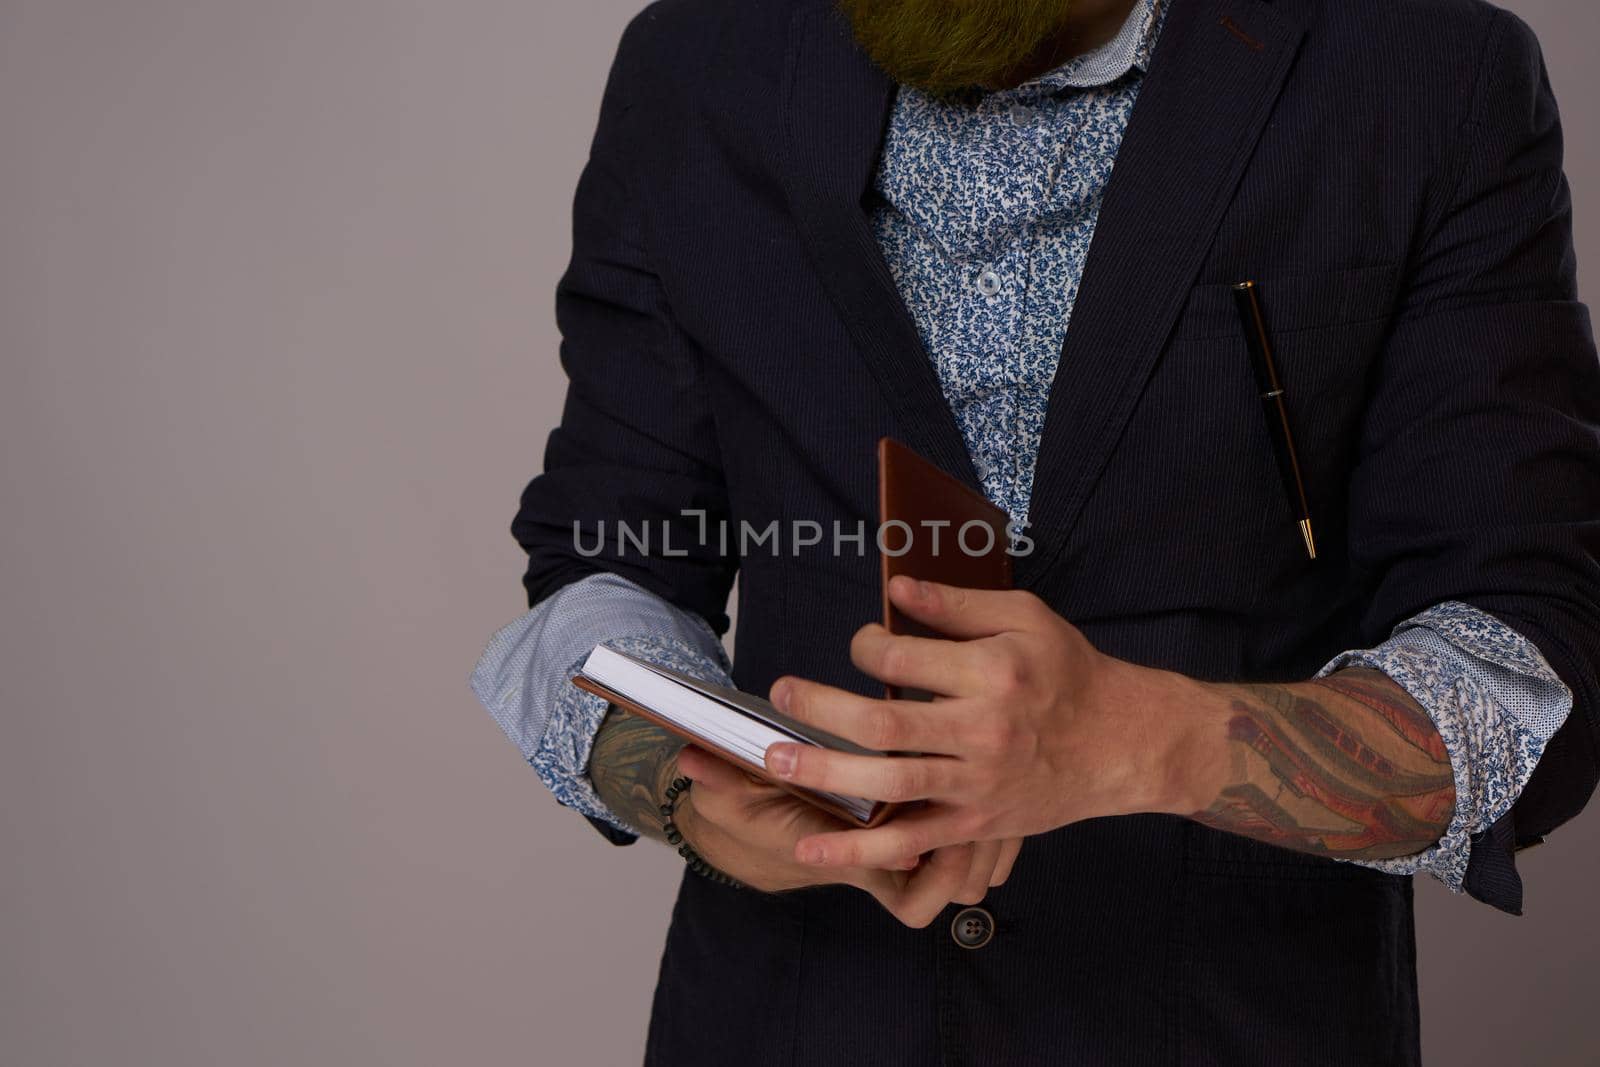 portrait of a business man wearing glasses with a beard posing an official. High quality photo